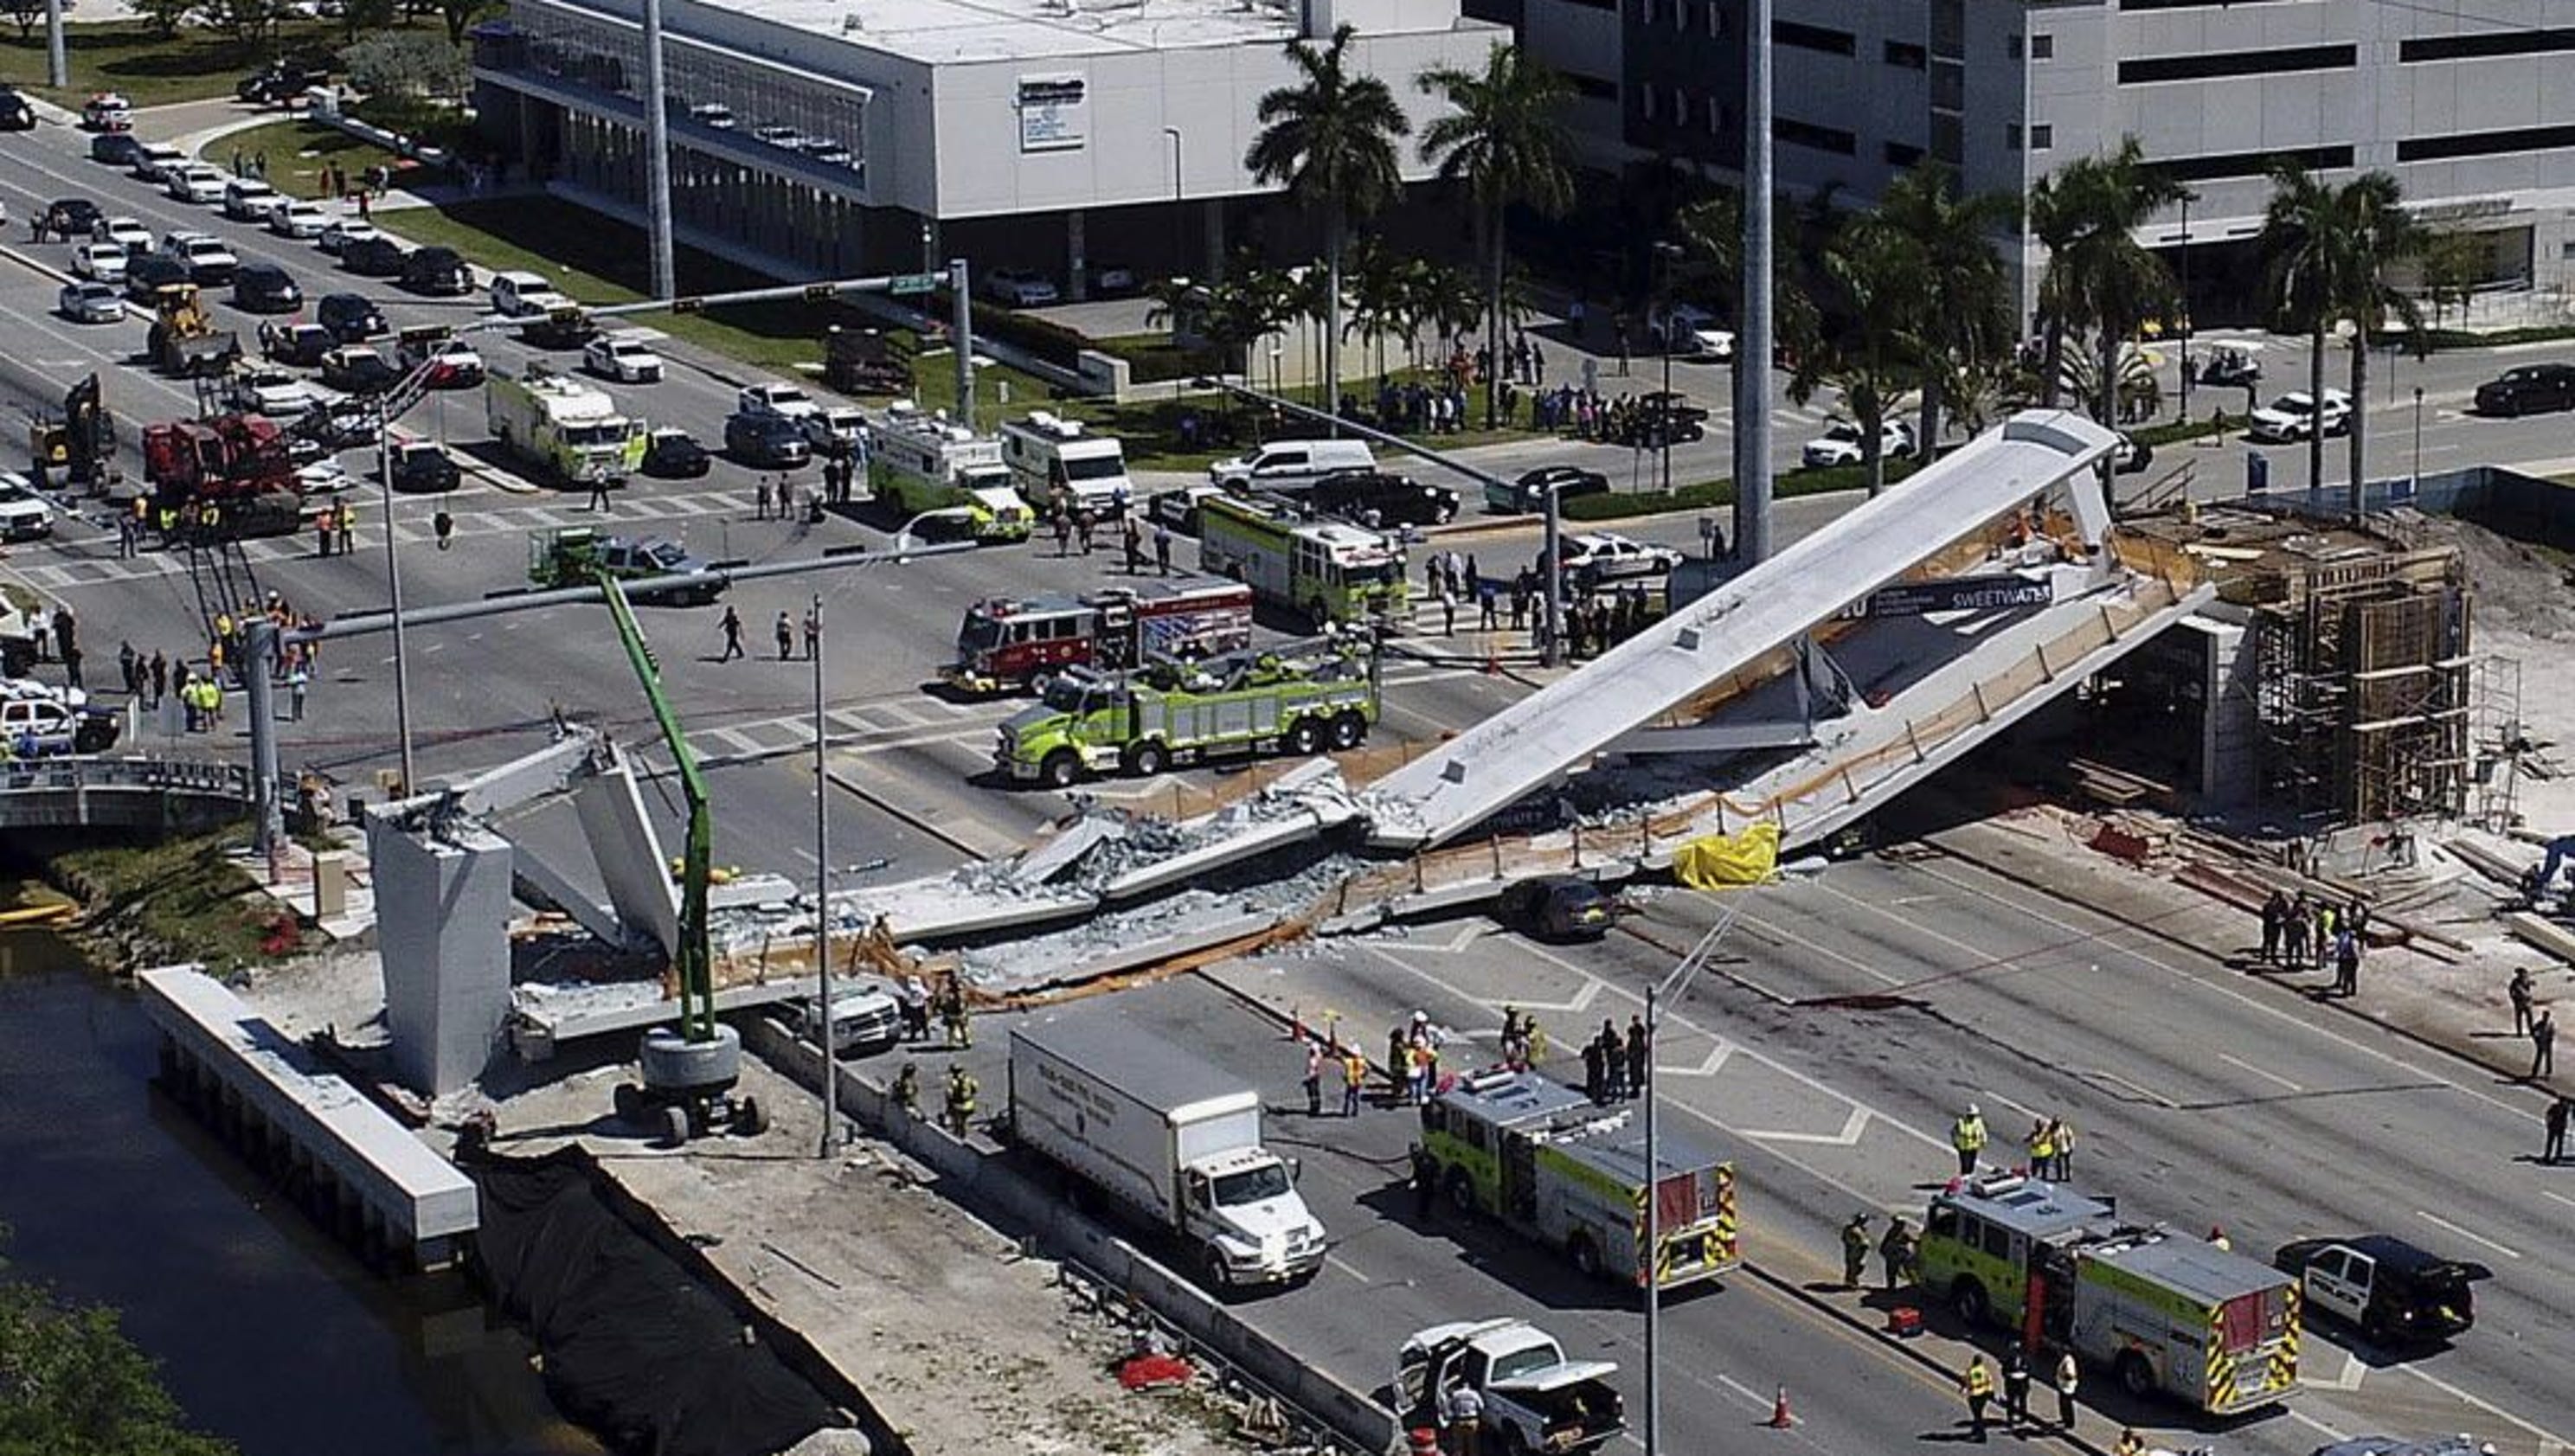 A new bridge collapsed in Florida today. Has anything like that